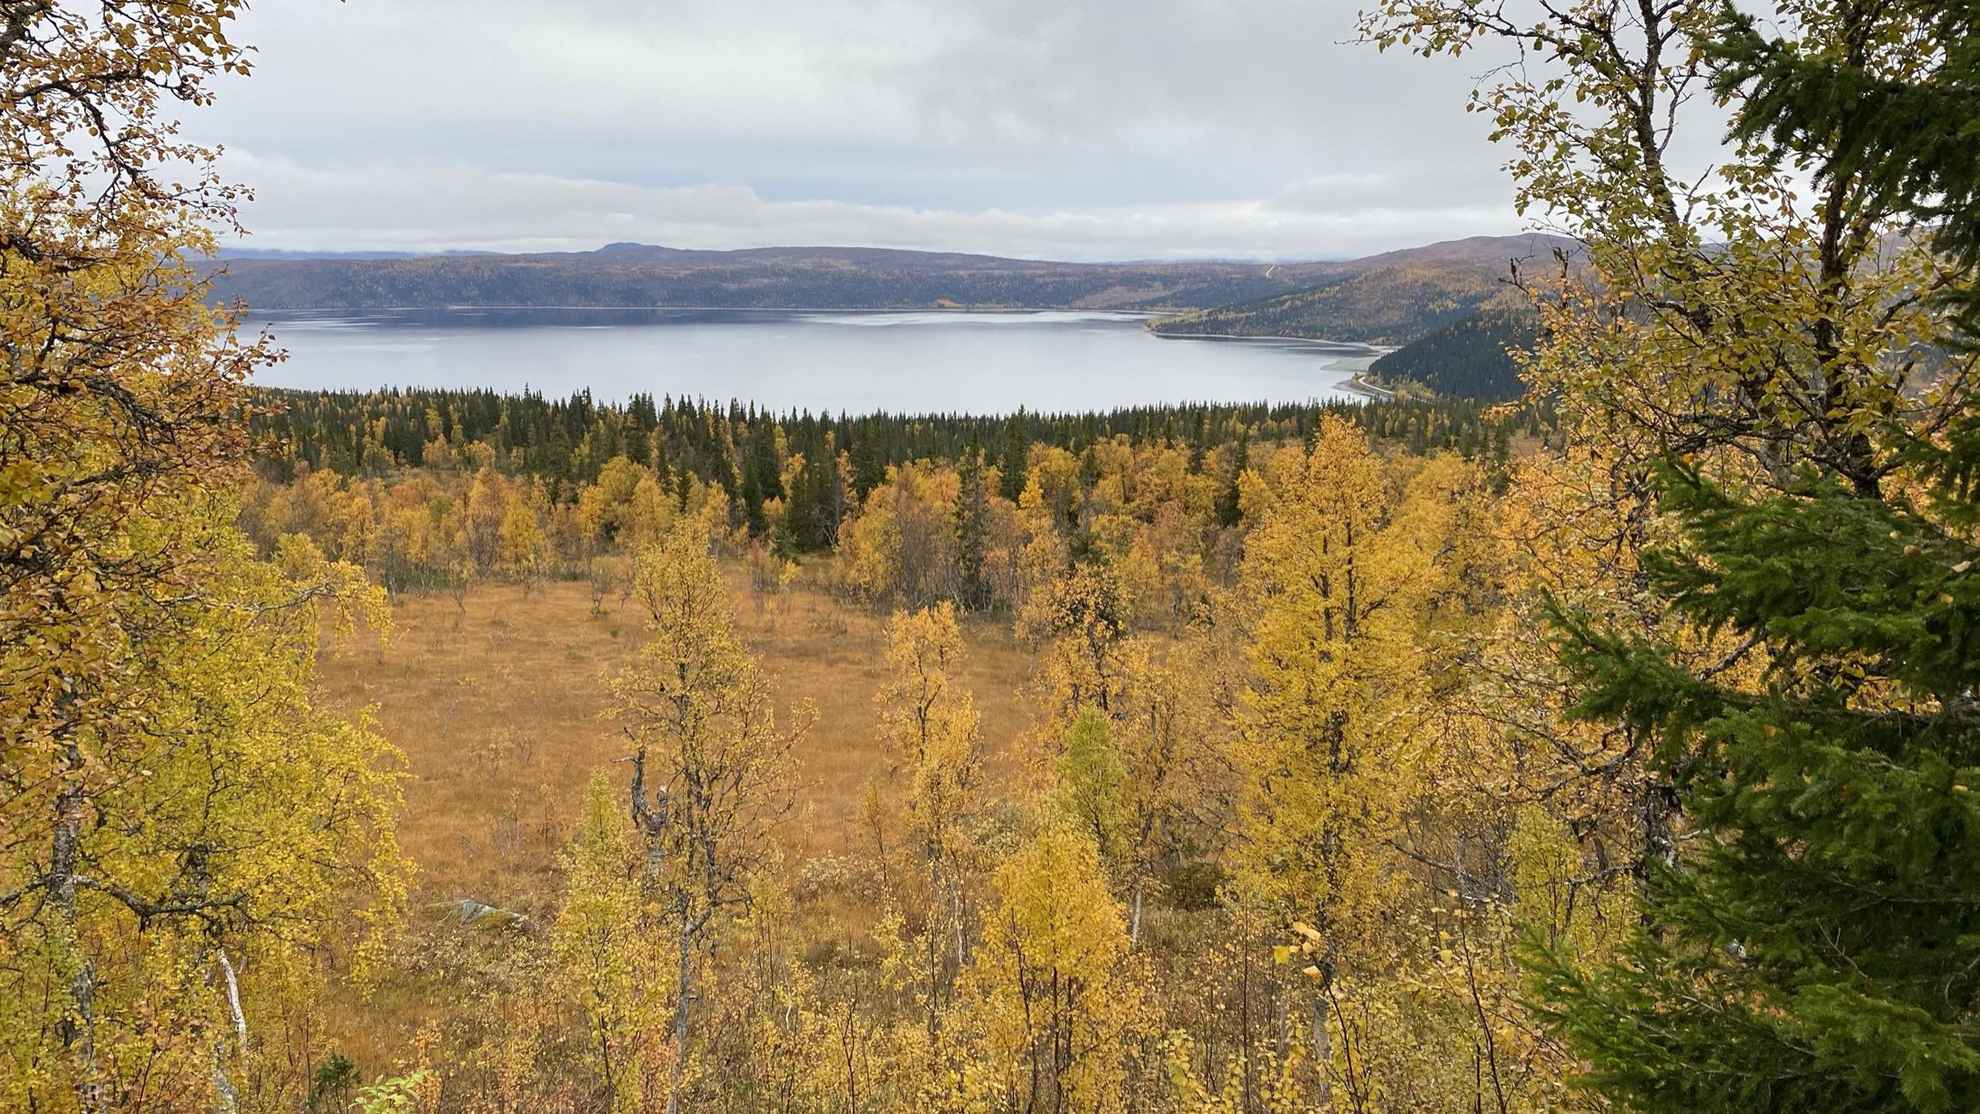 A lake is surrounded by mountains and forest. The trees have yellow and orange autumn colours.